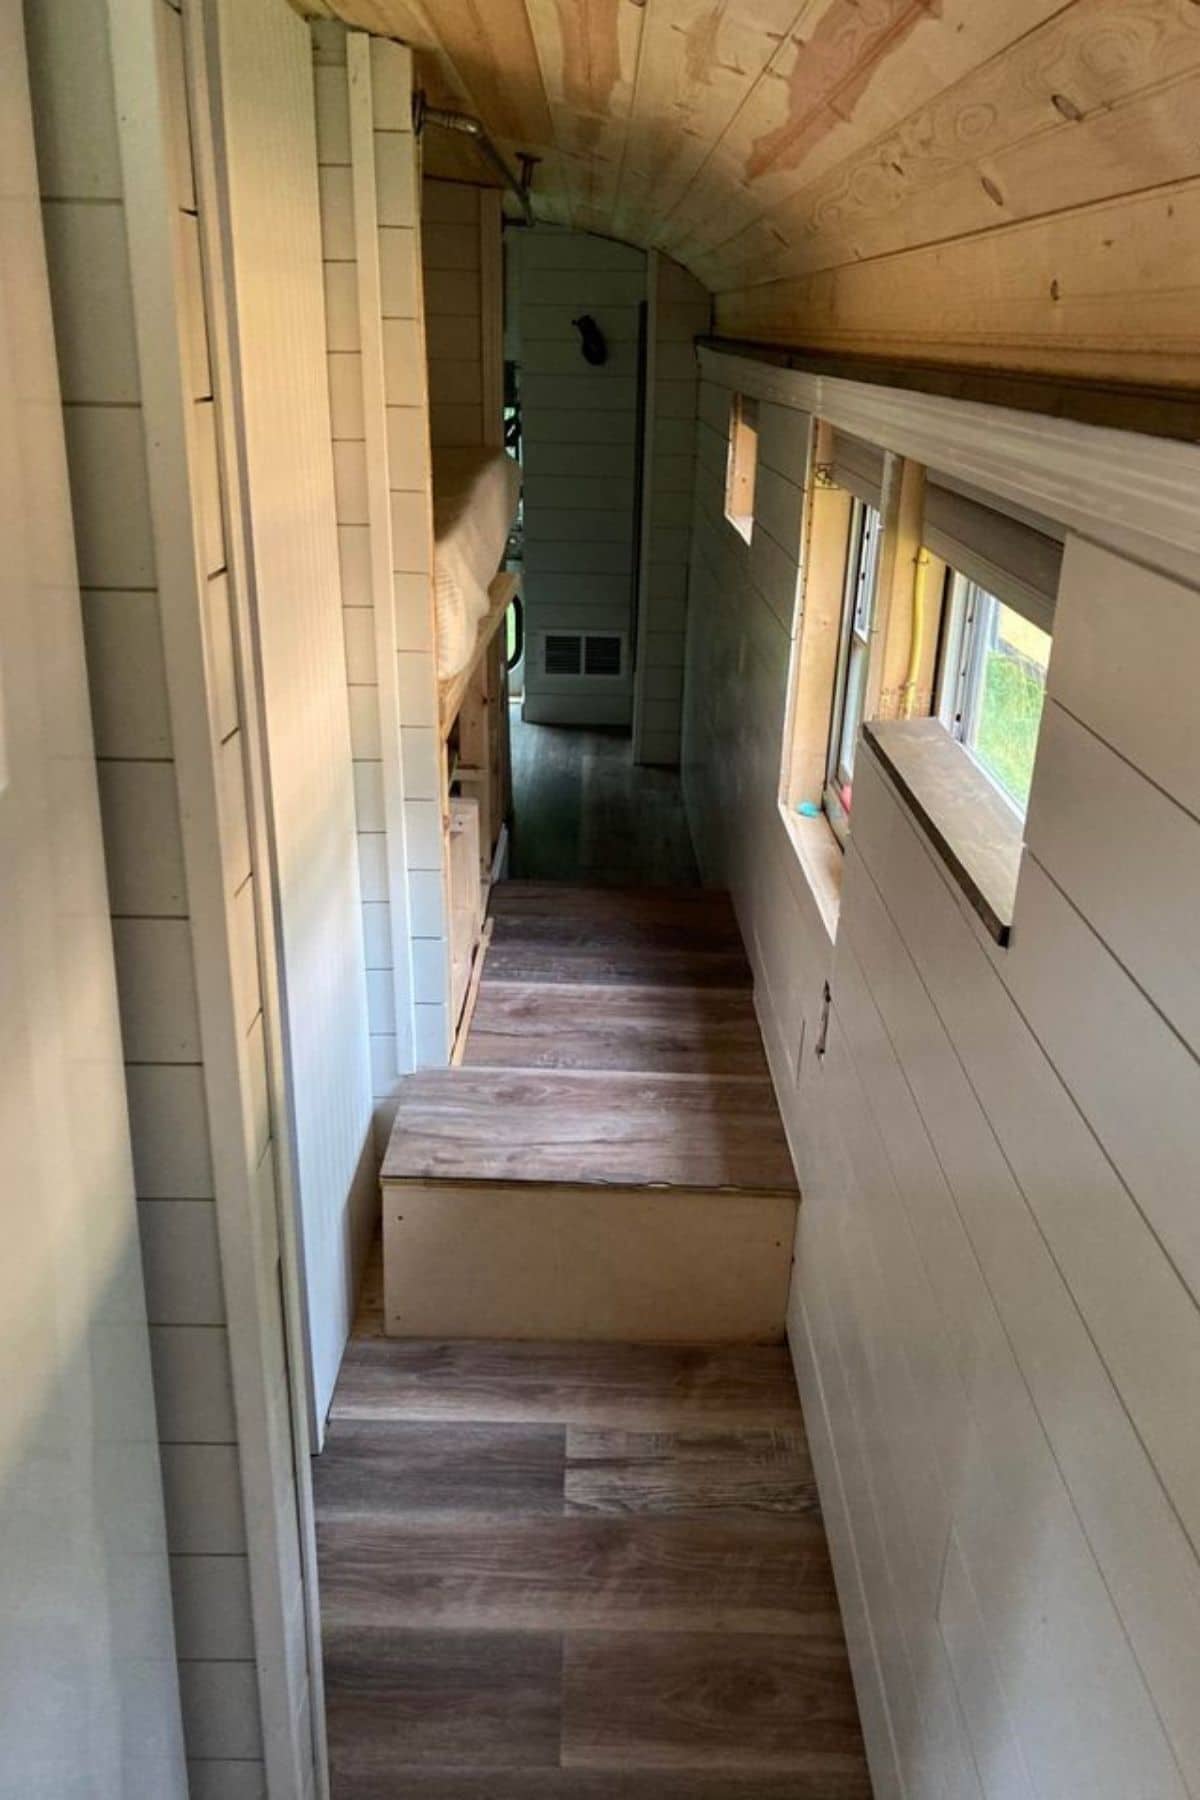 Hall in bus with shiplap walls and wood floor